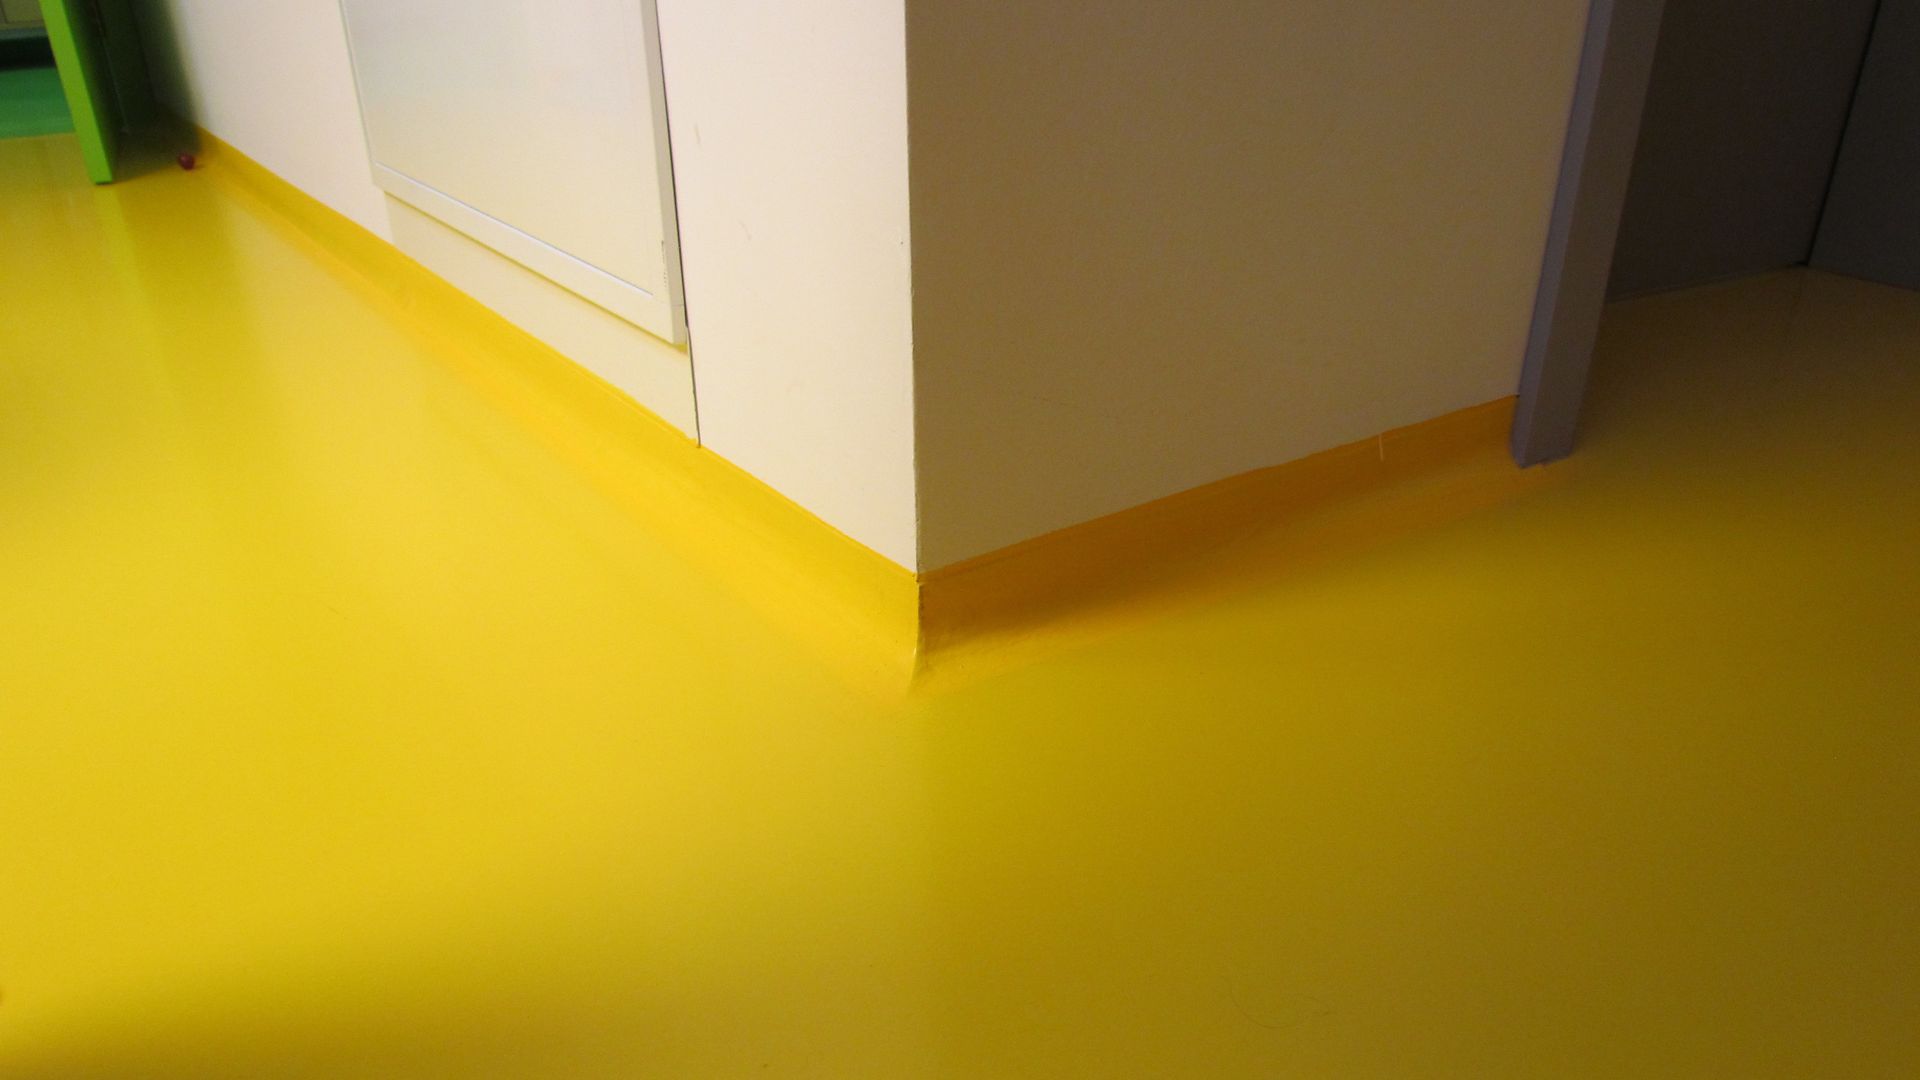 Seamless coving transition detail at floor to wall connection in yellow floor